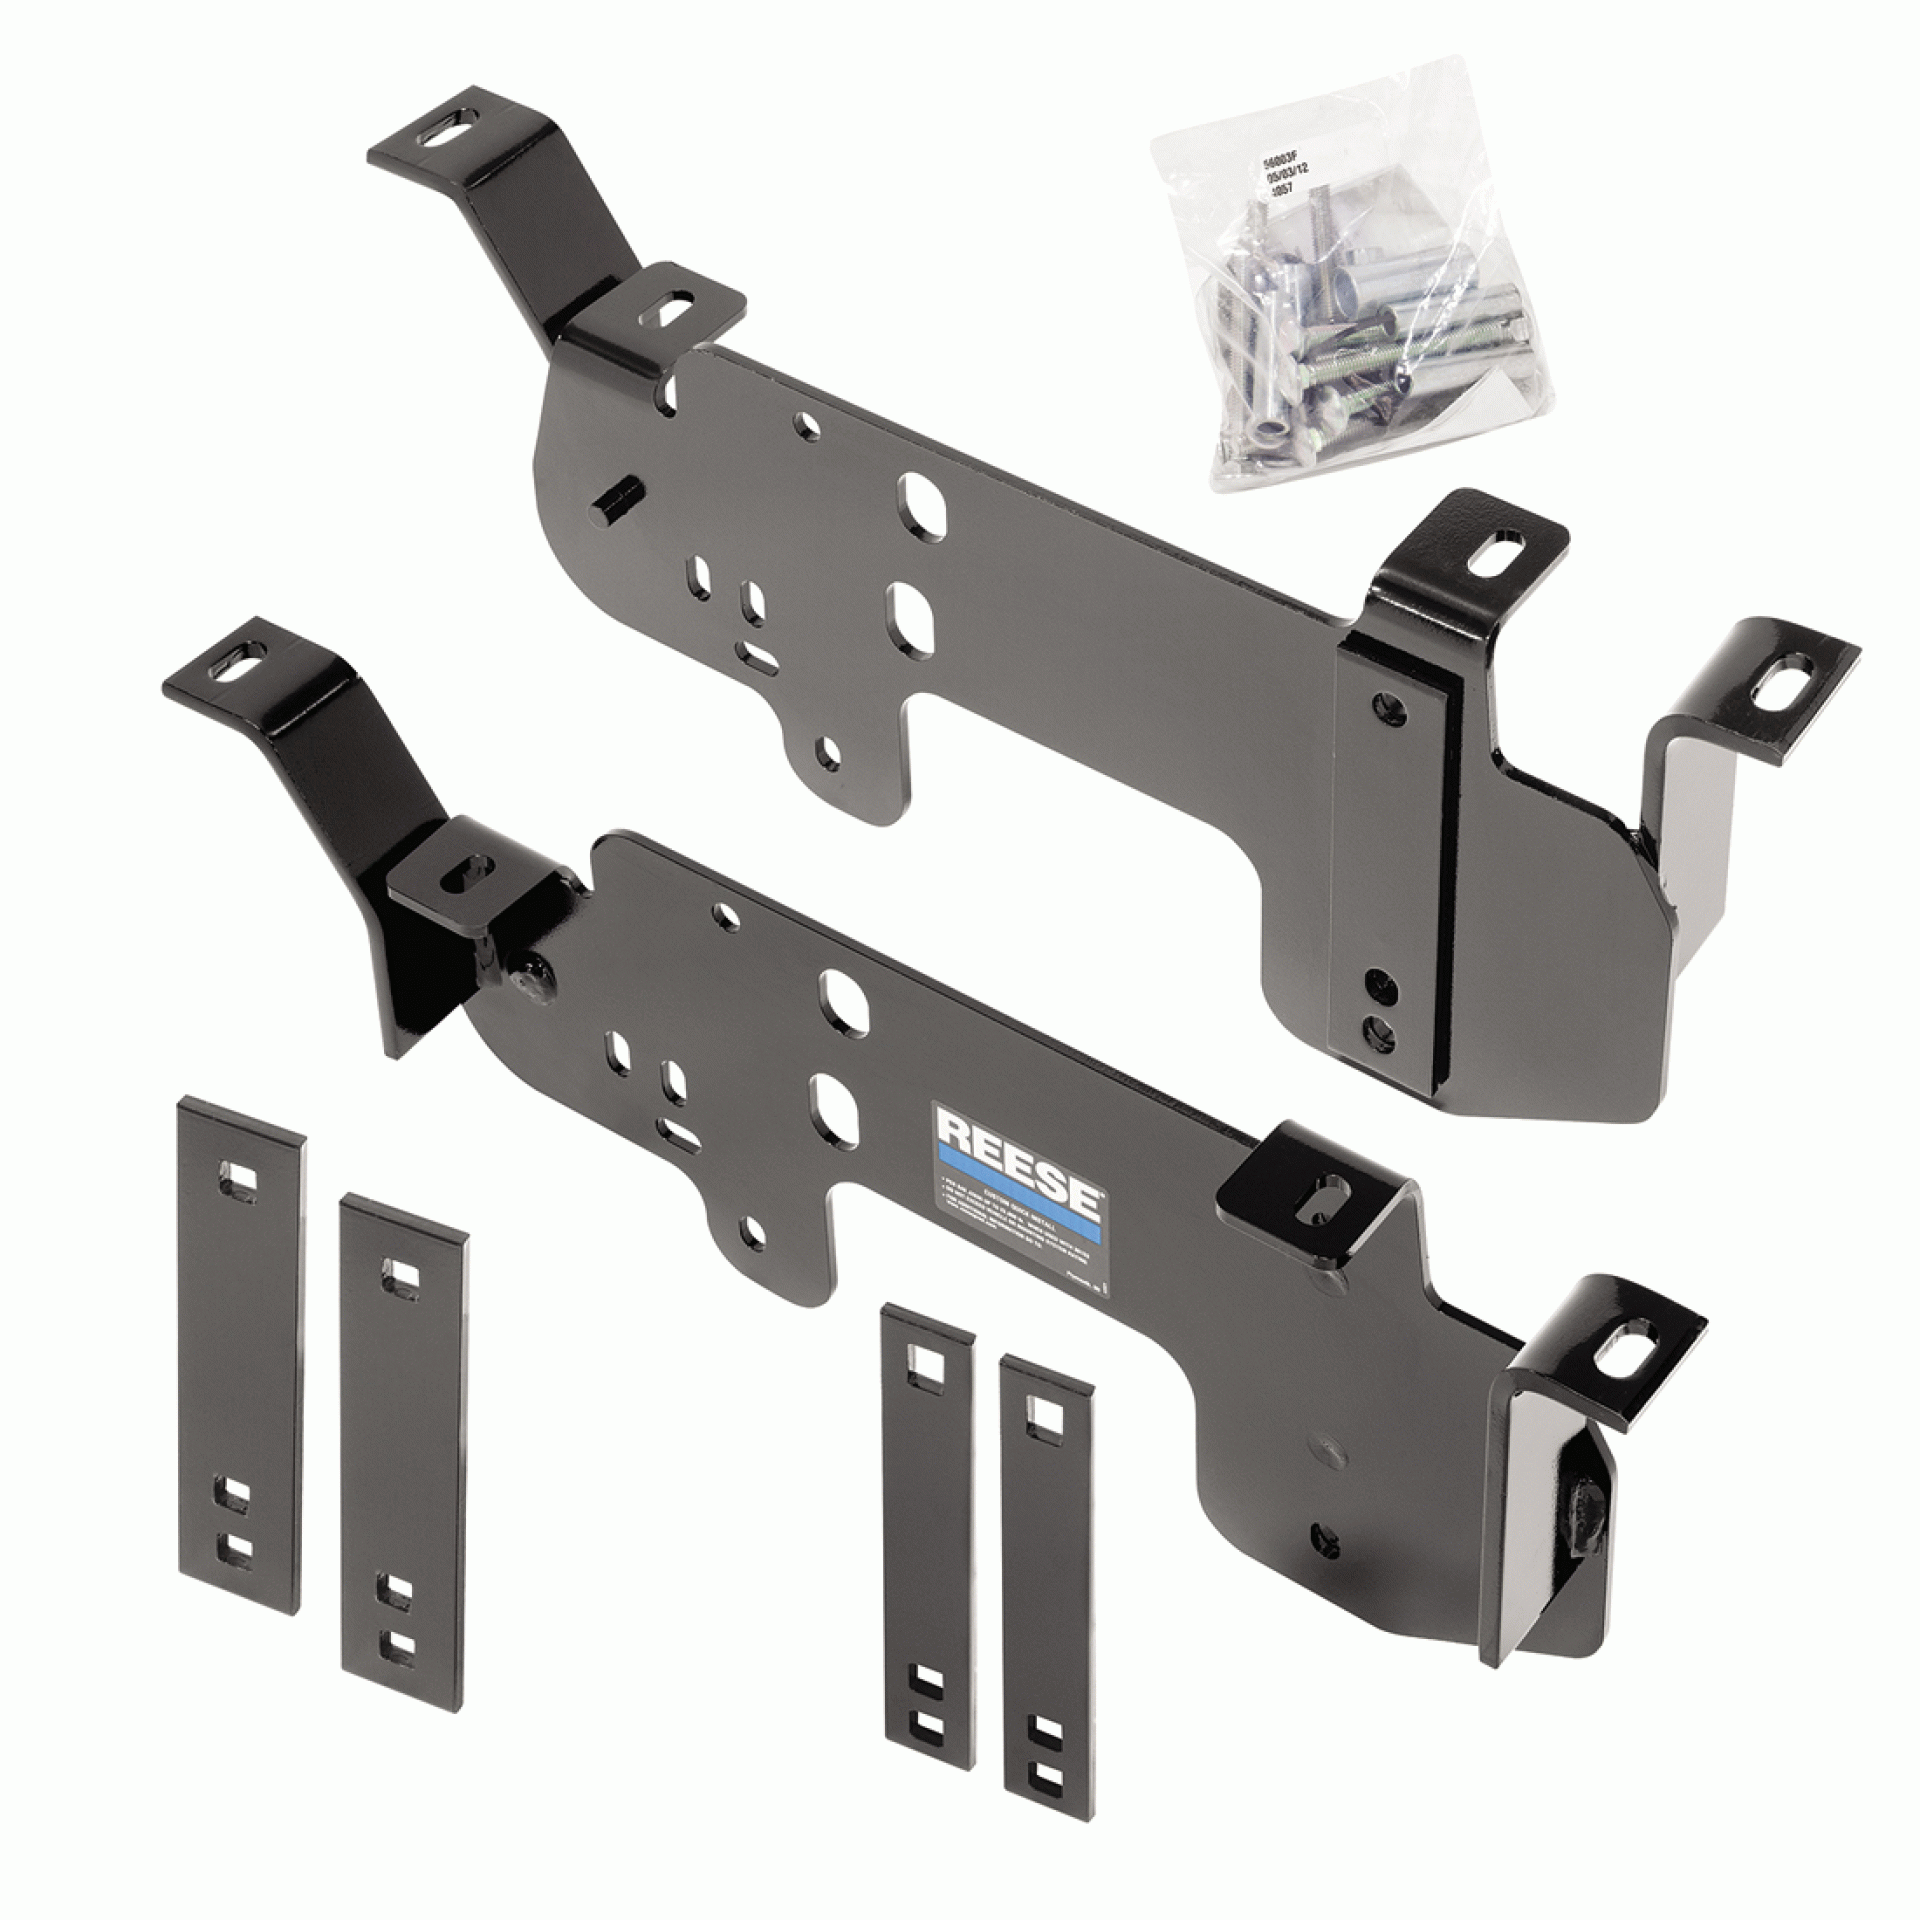 Reese | 56003 | Bracket Kit For Fifth Wheel Outboard Quick Install Brackets